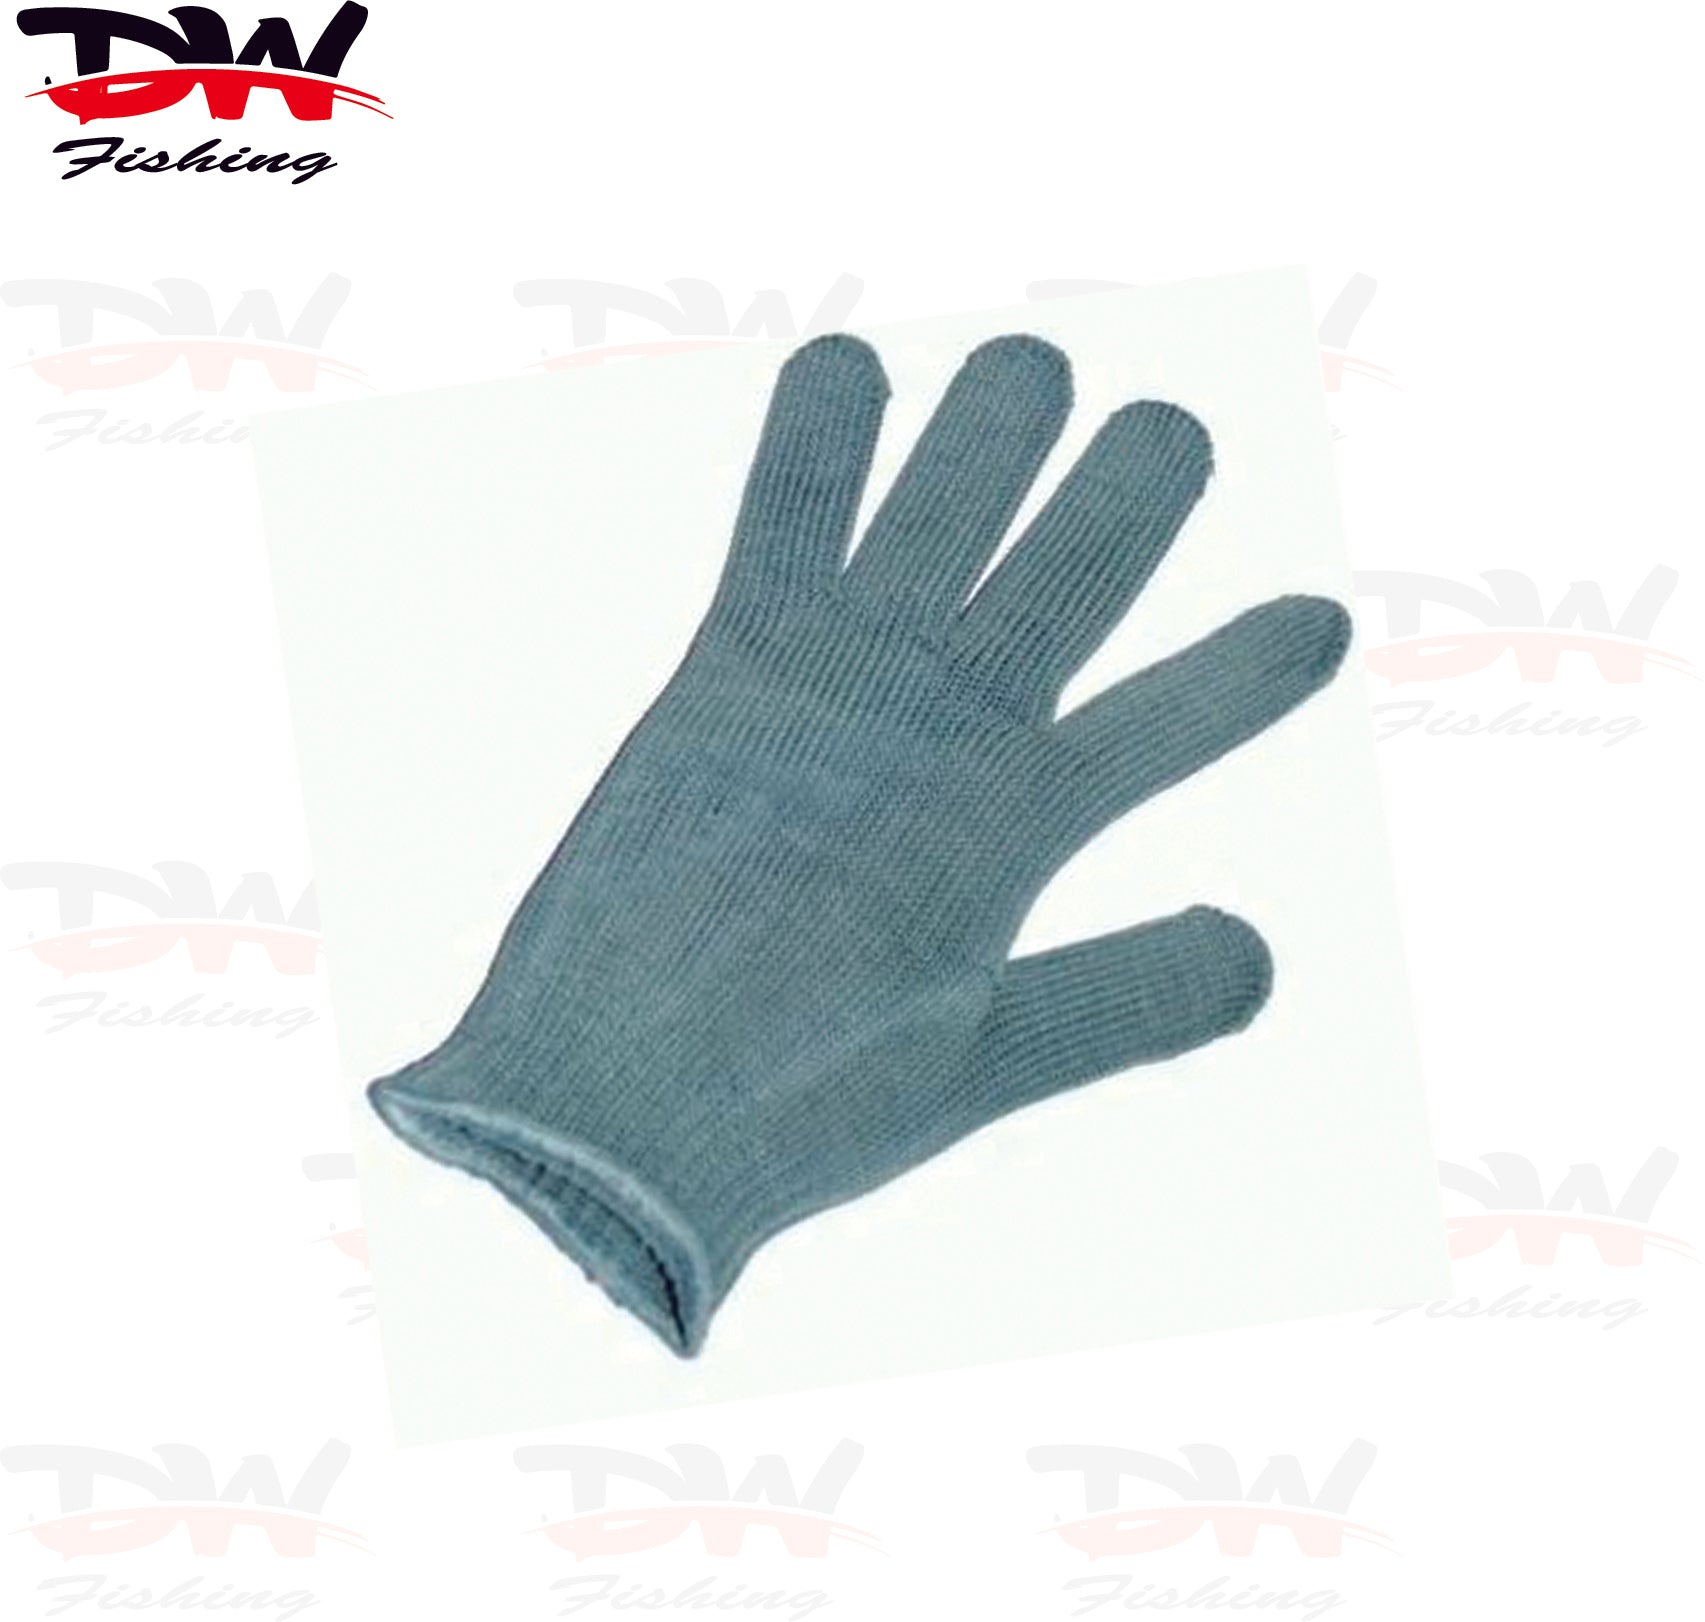 Maritec Stainless Steel Protection Fillet Glove